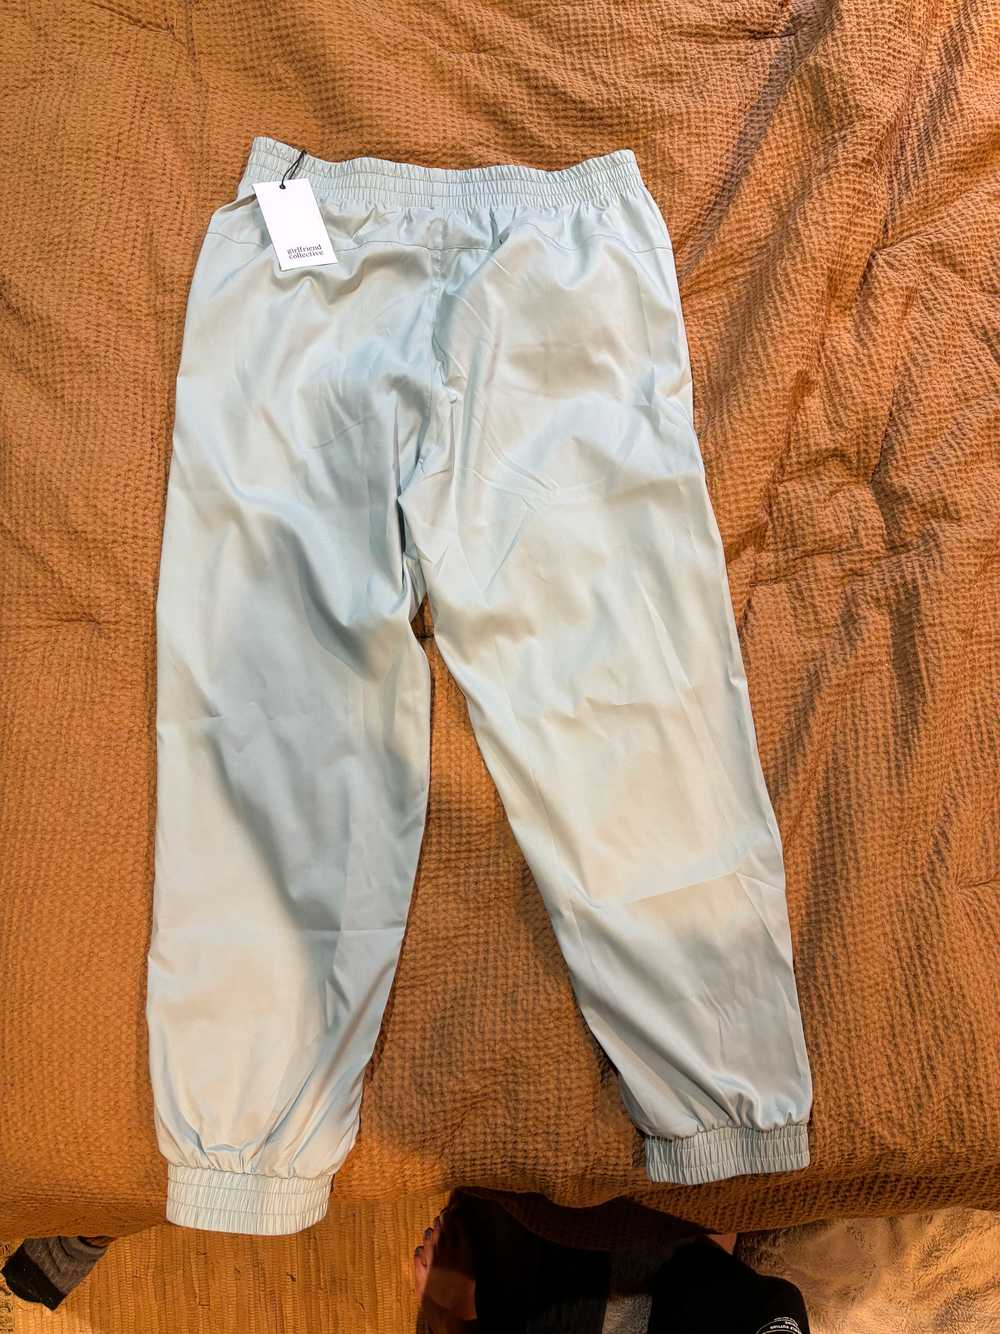 Girlfriend Collective Glass Summit Track Pant - image 3